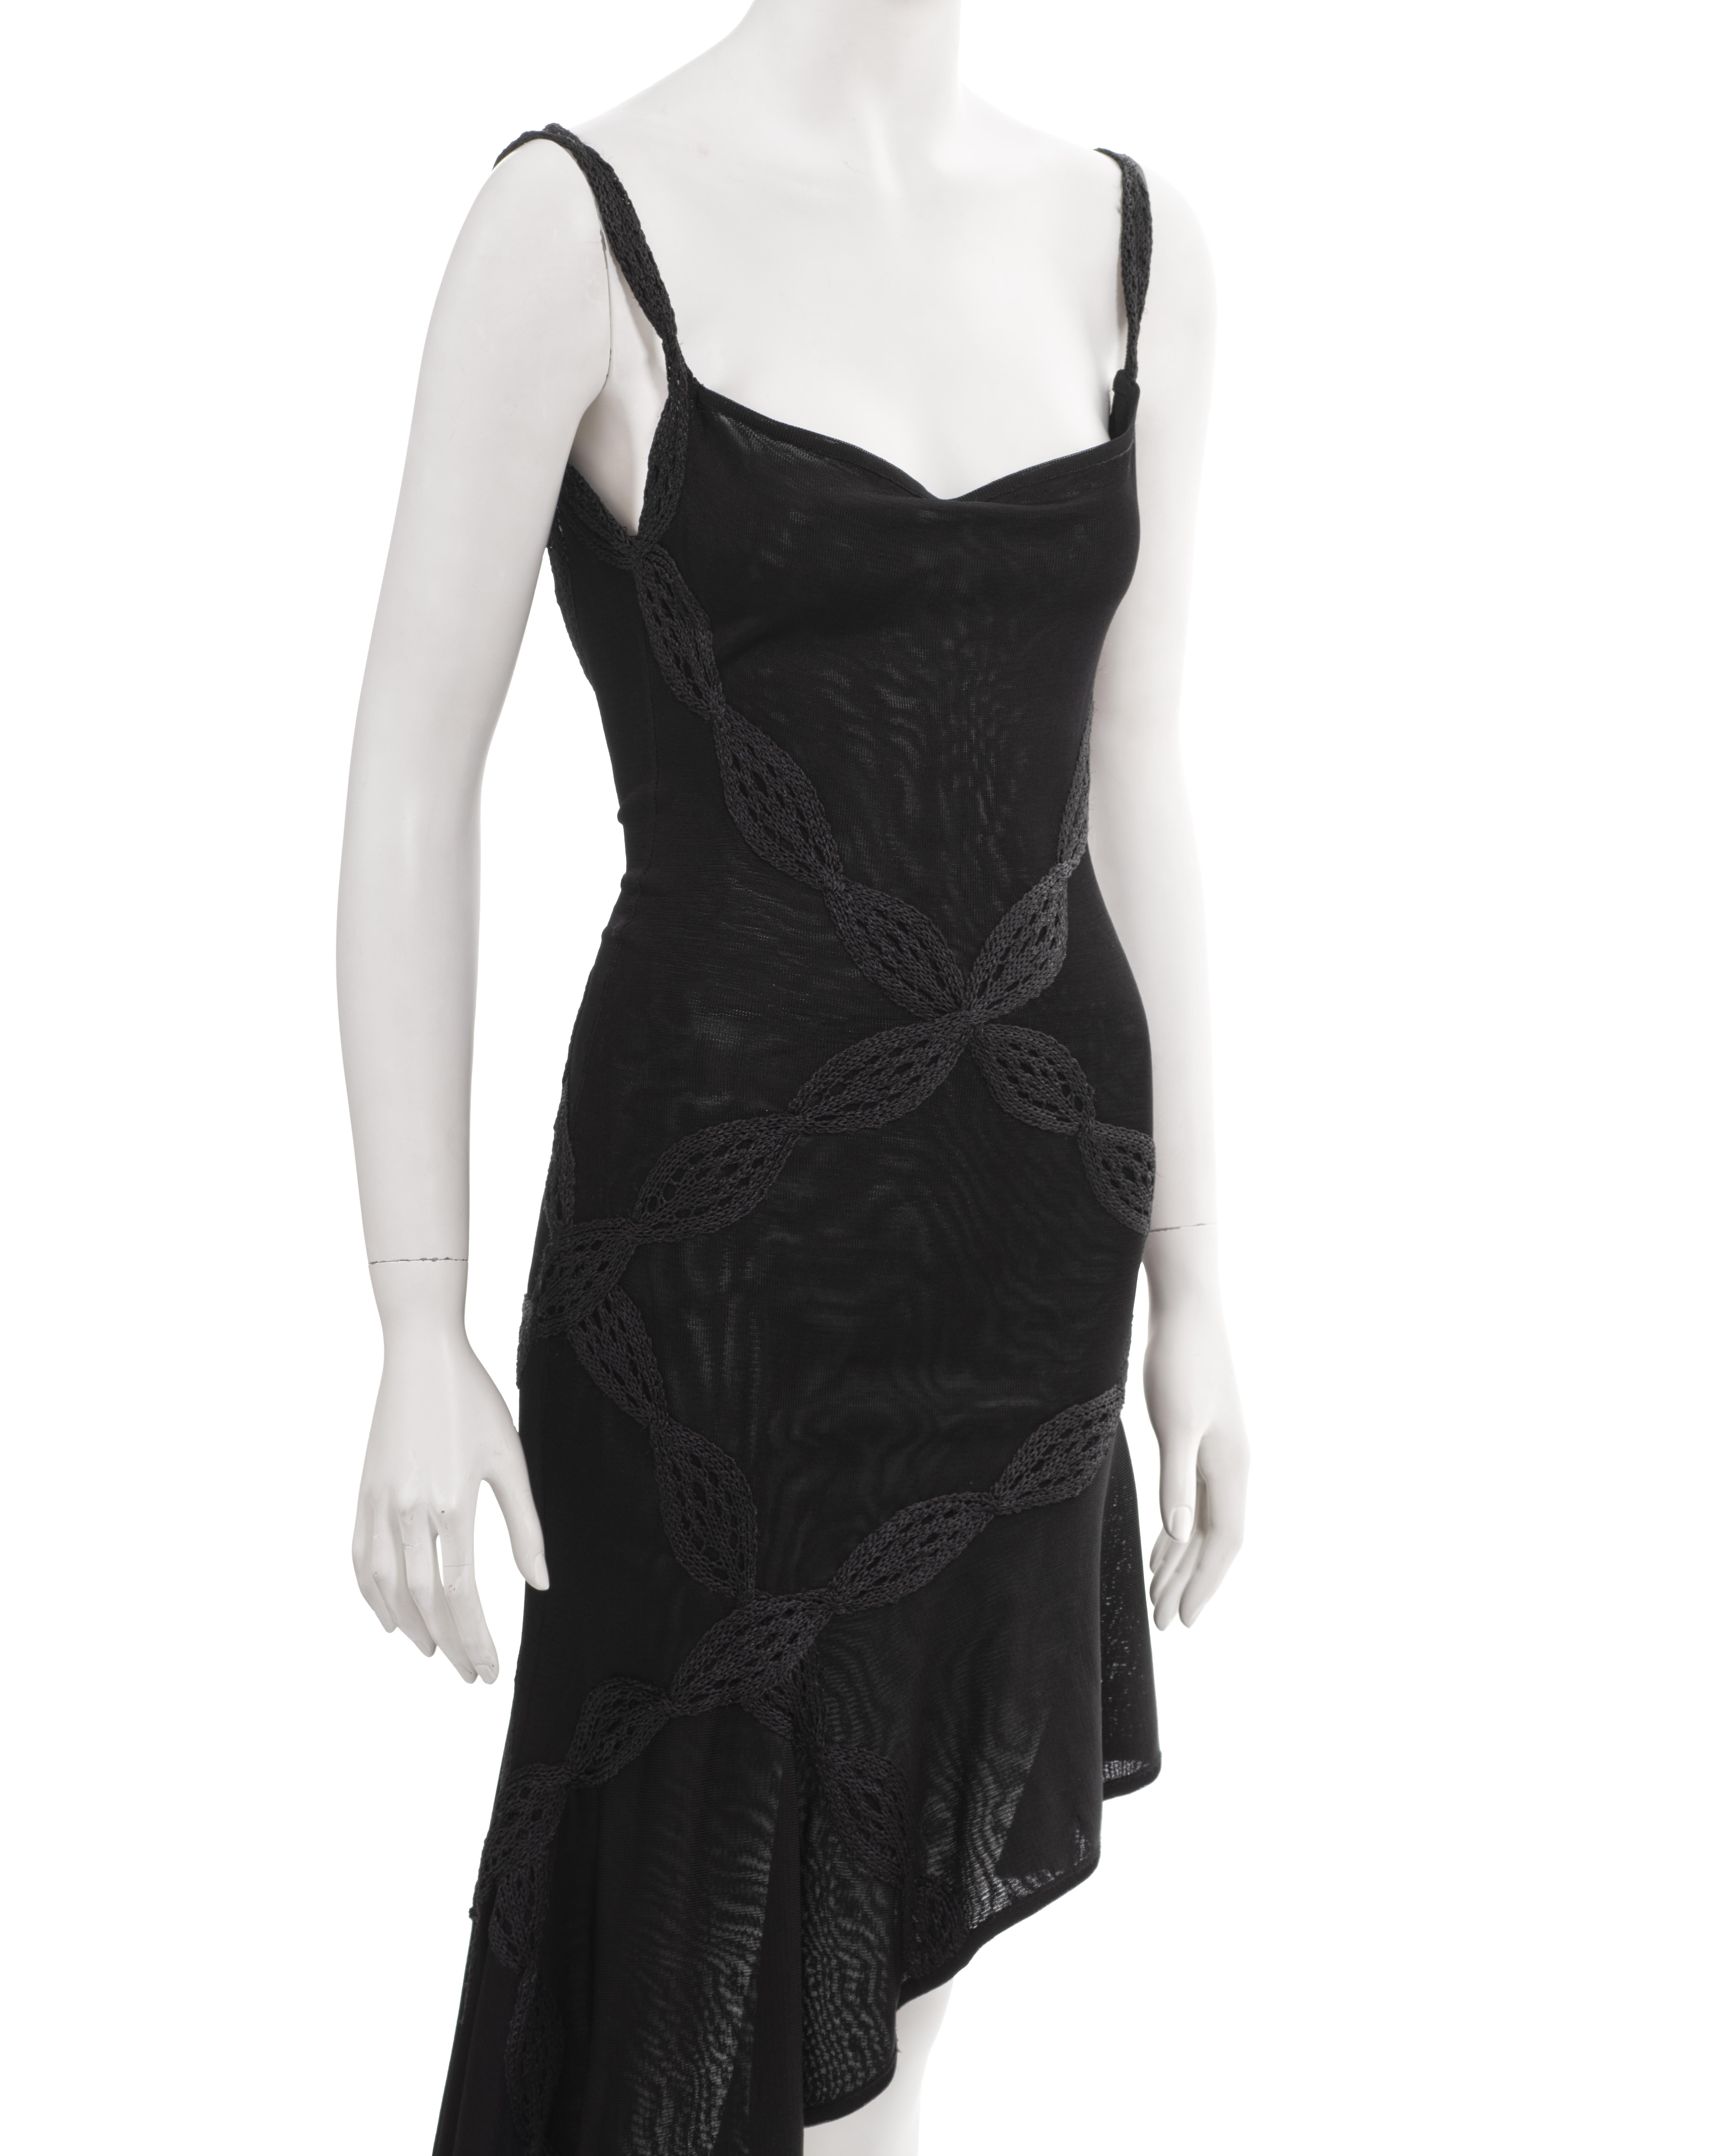 Christian Dior by John Galliano black embroidered knit evening dress, ss 2001 For Sale 1